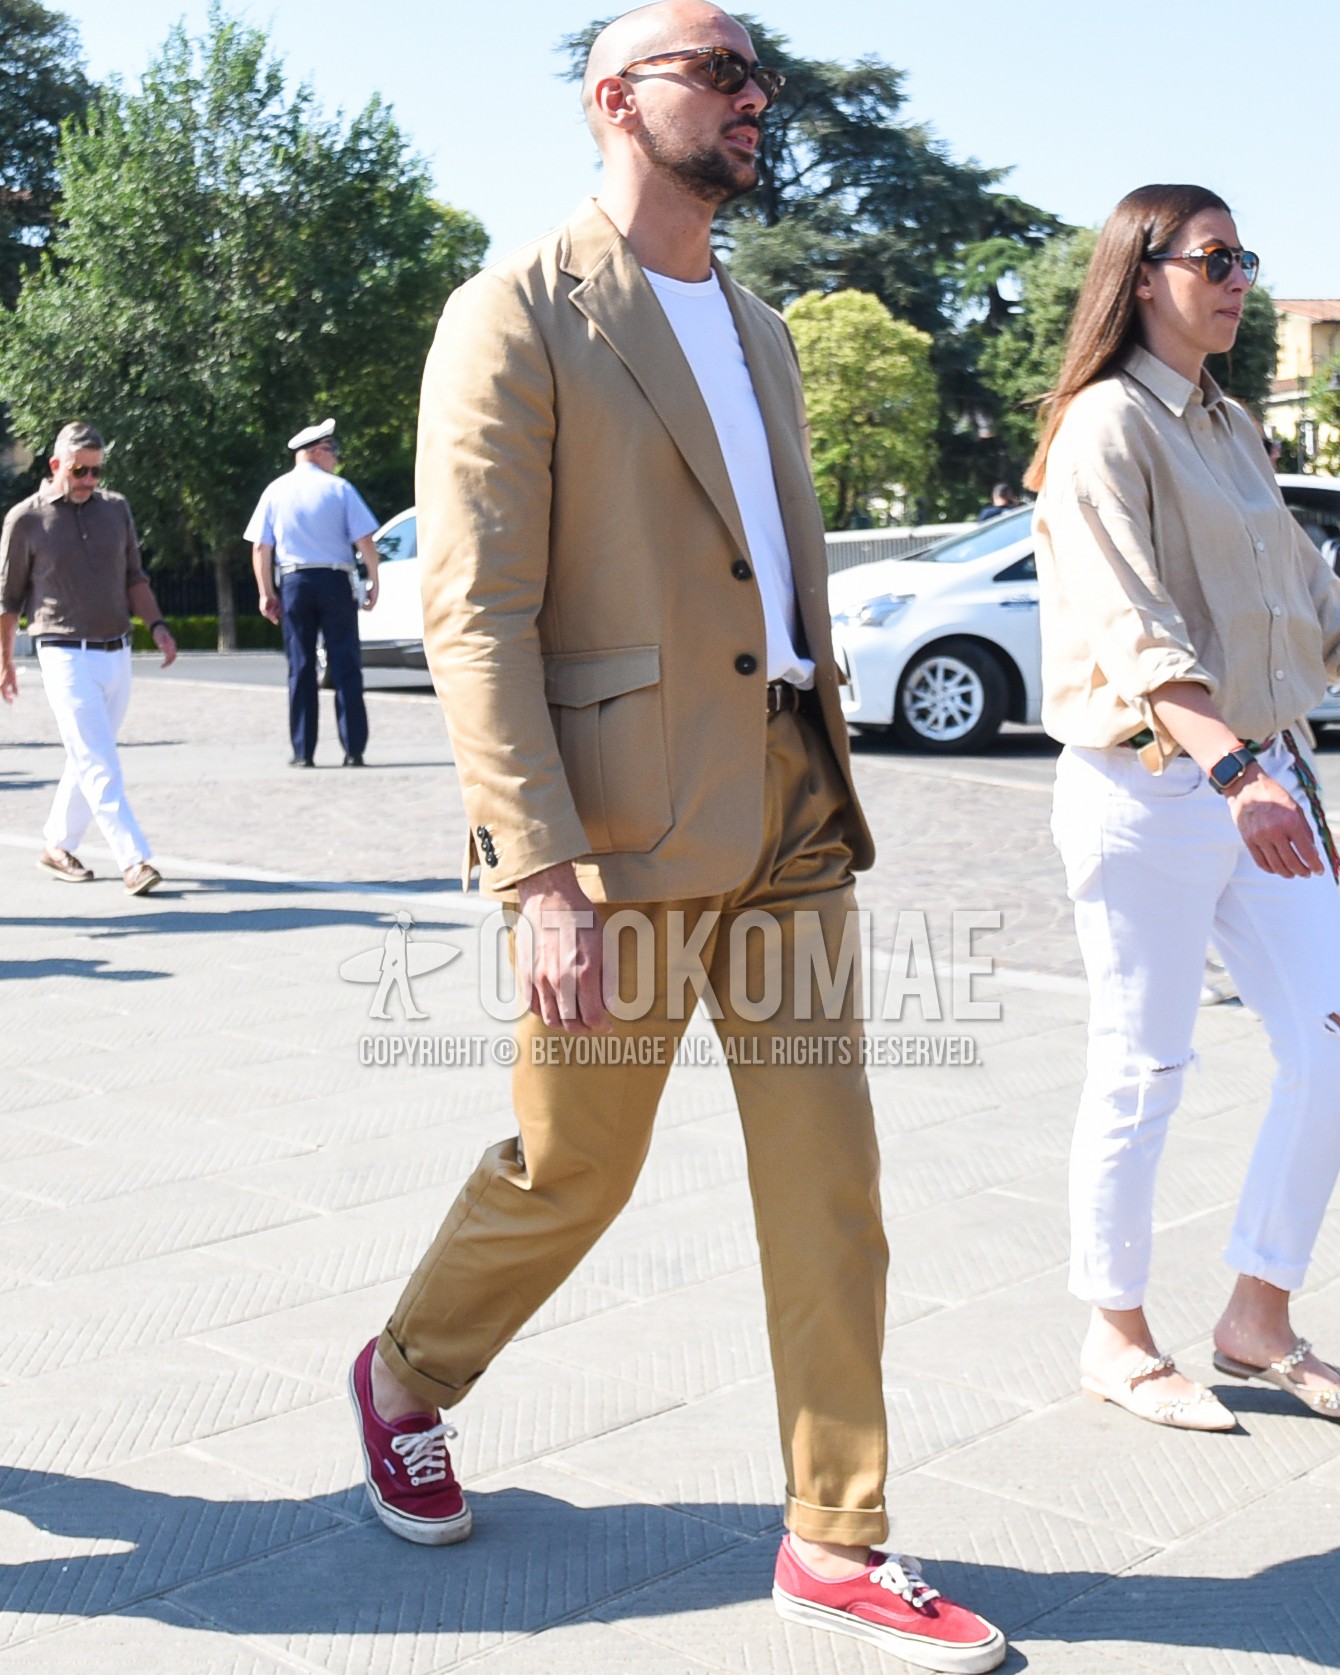 Men's spring summer outfit with brown tortoiseshell sunglasses, beige plain tailored jacket, white plain t-shirt, brown plain leather belt, beige plain chinos, red low-cut sneakers.